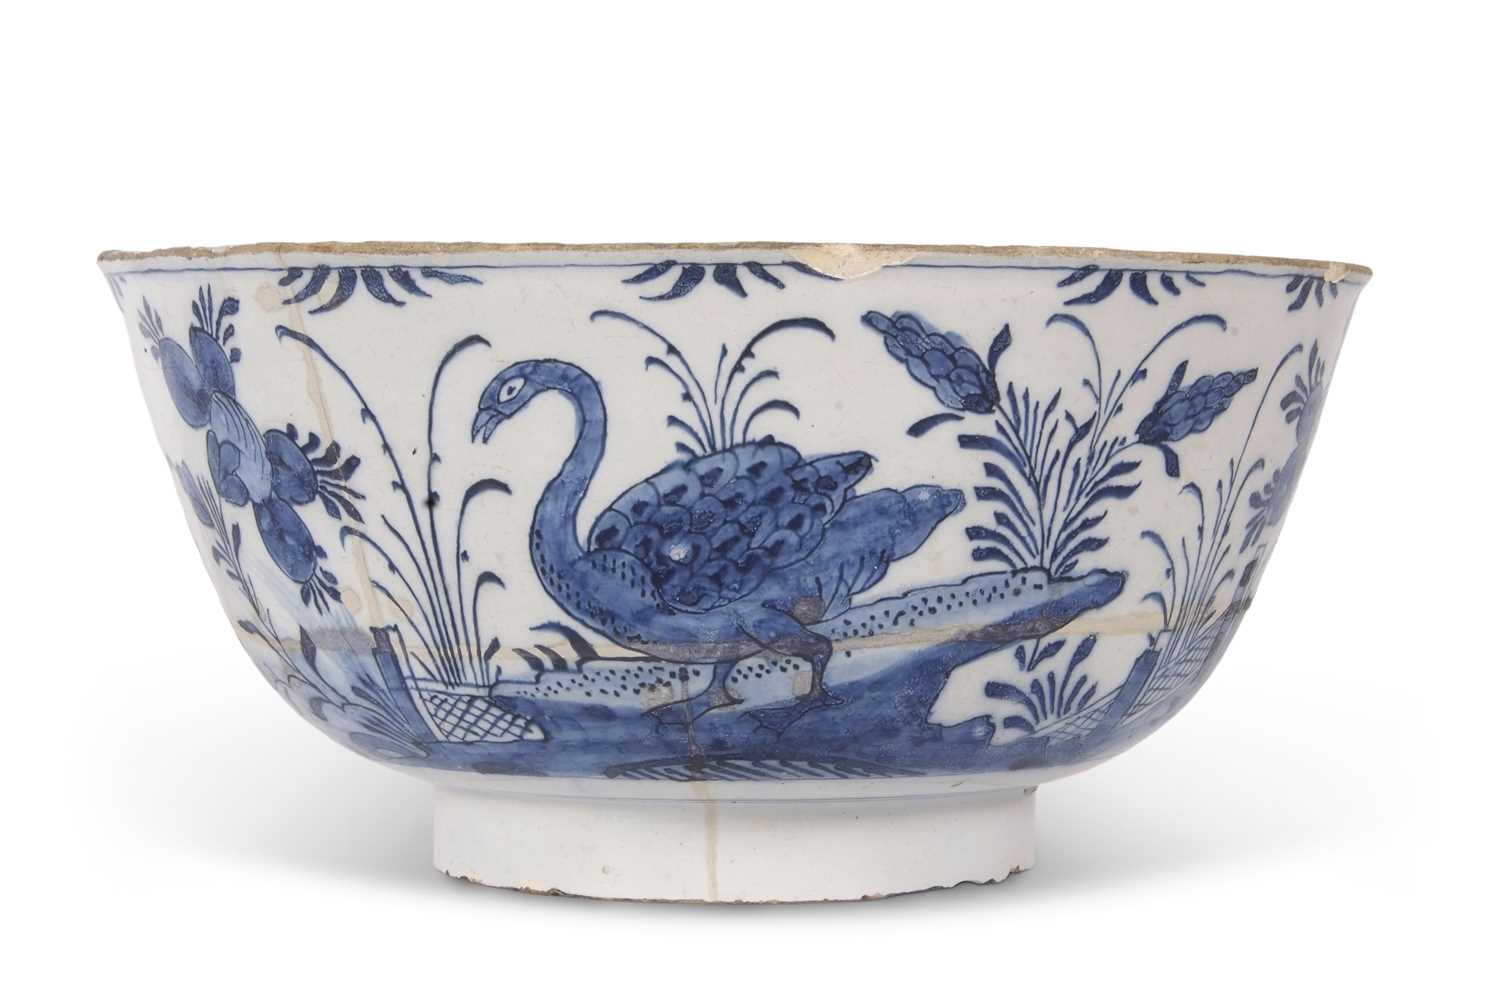 An early 18th Century English Delft punch bowl, circa 1730 with blue and white Chinese porcelain